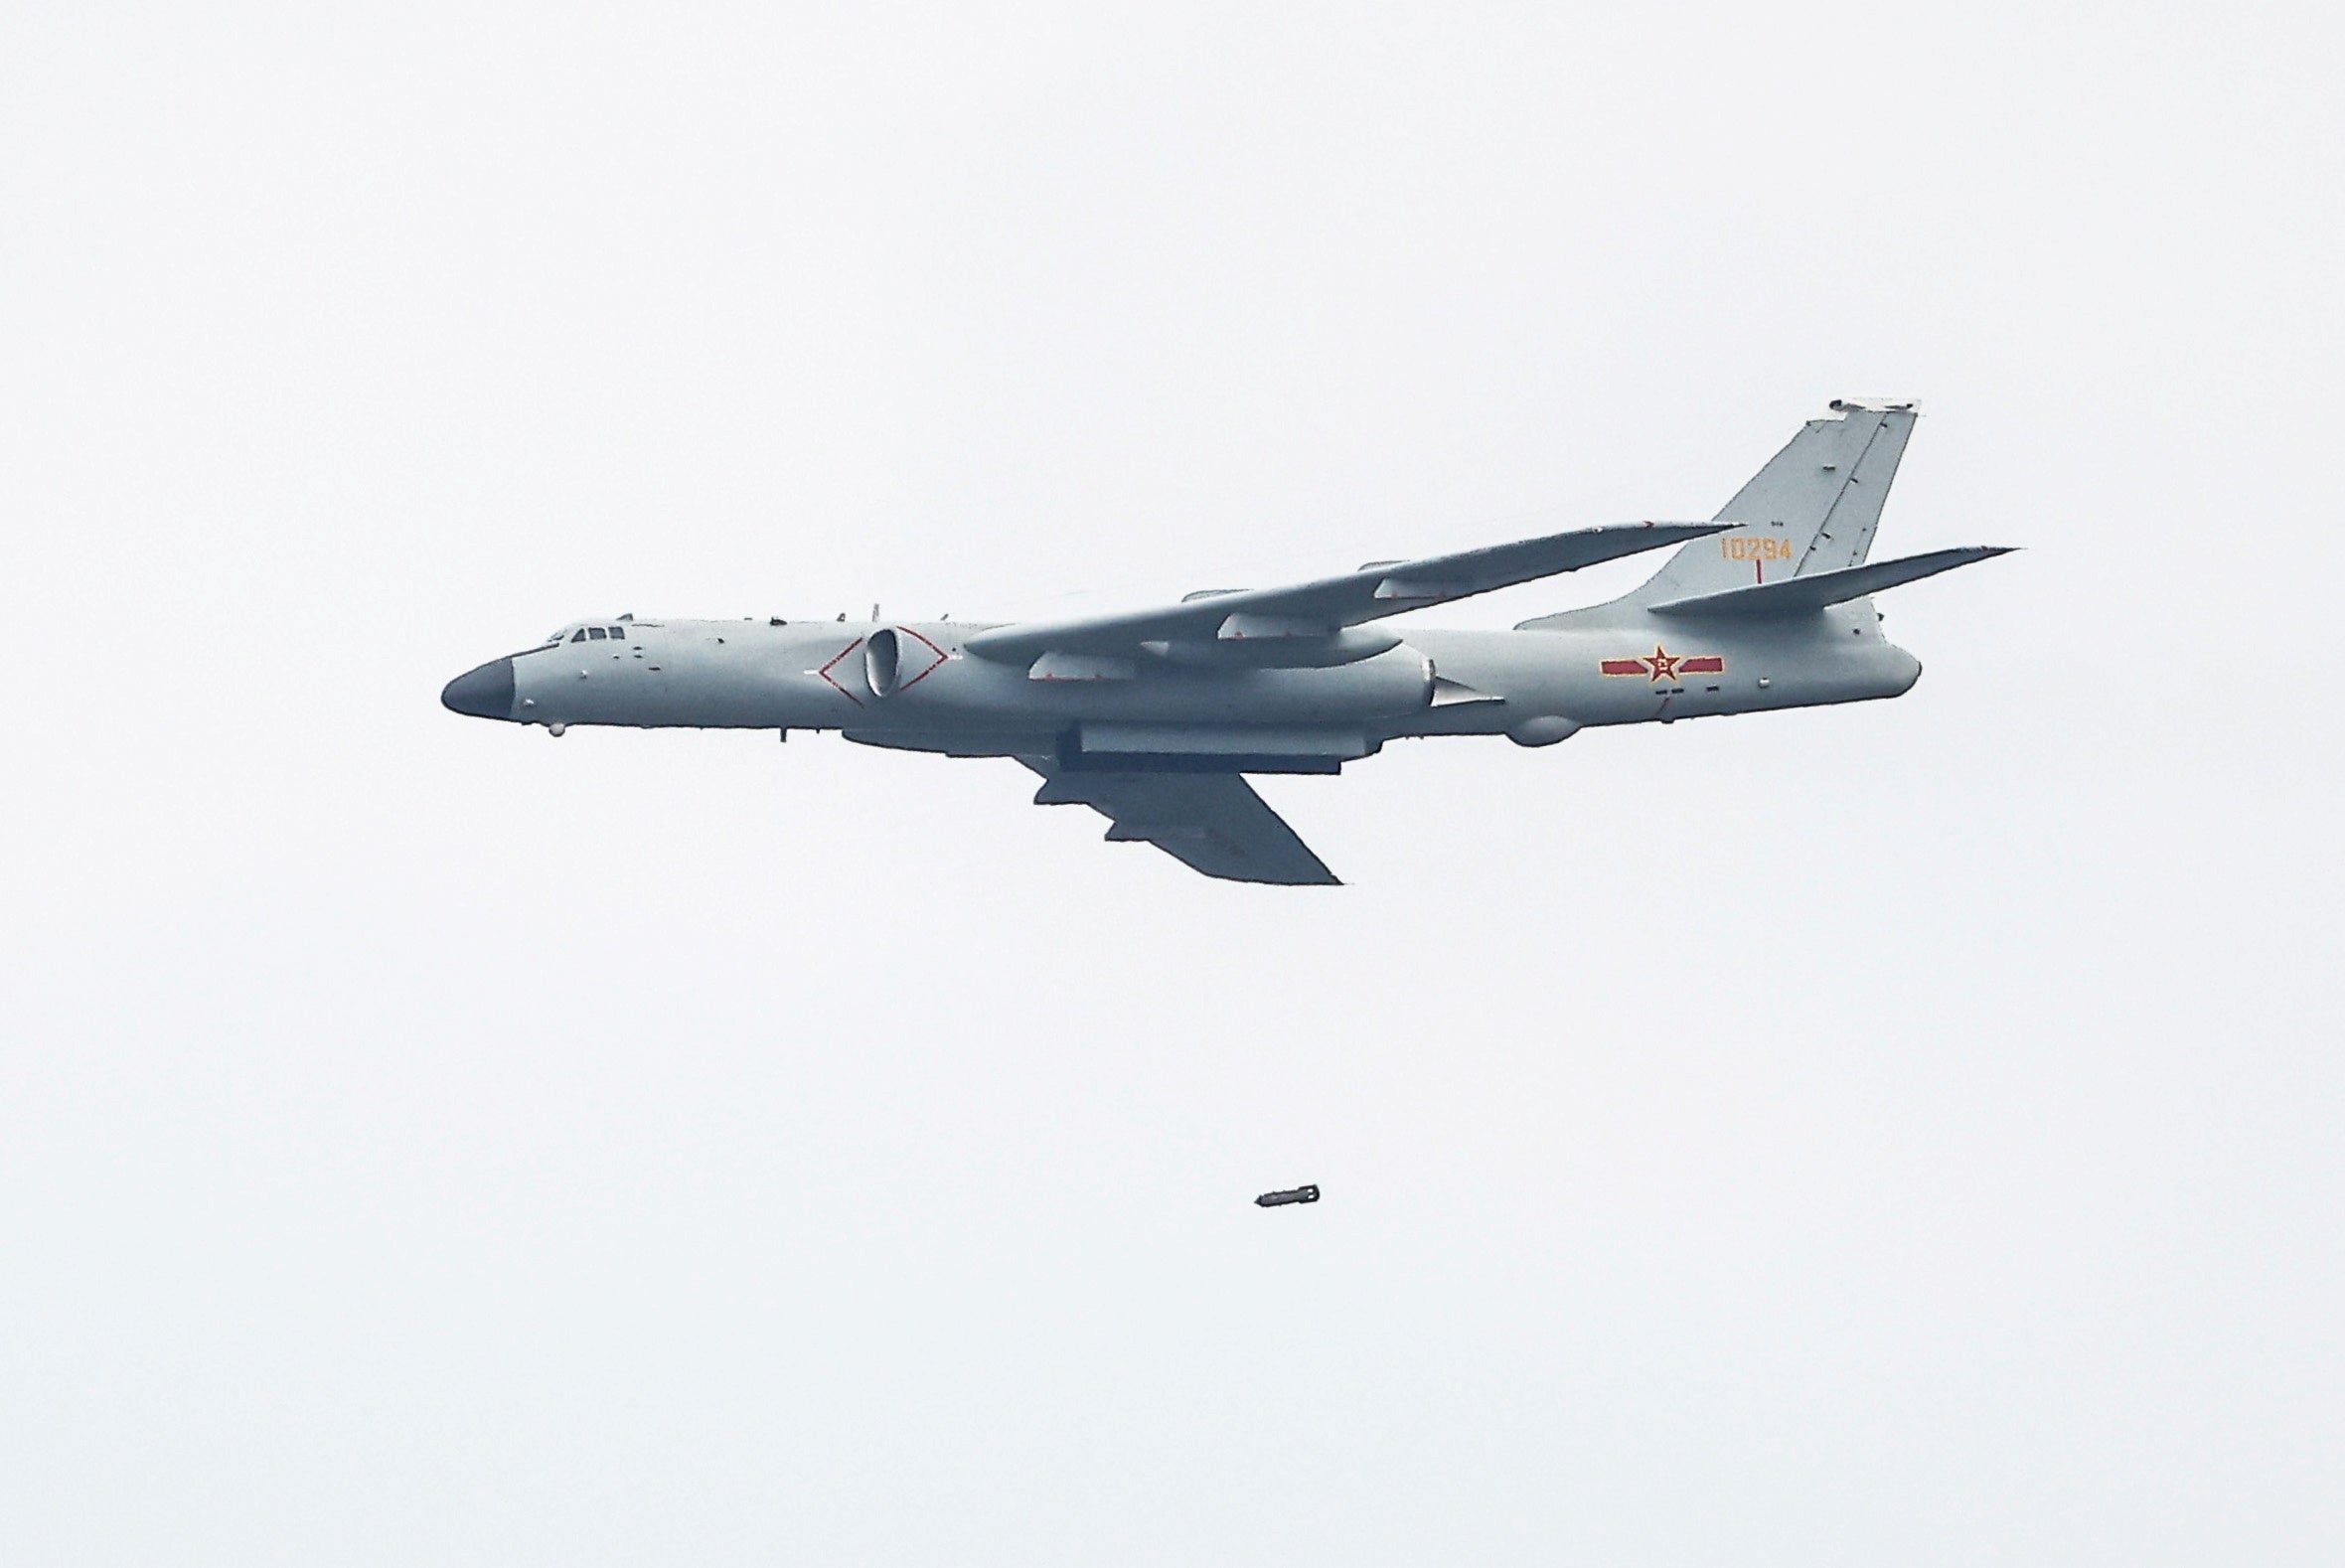 Representative: A Chinese Xian H-6 jet bomber drops a bomb during the Aviadarts competition, as part of the International Army Games 2021, at the Dubrovichi range outside Ryazan, Russia on 27 August 2021